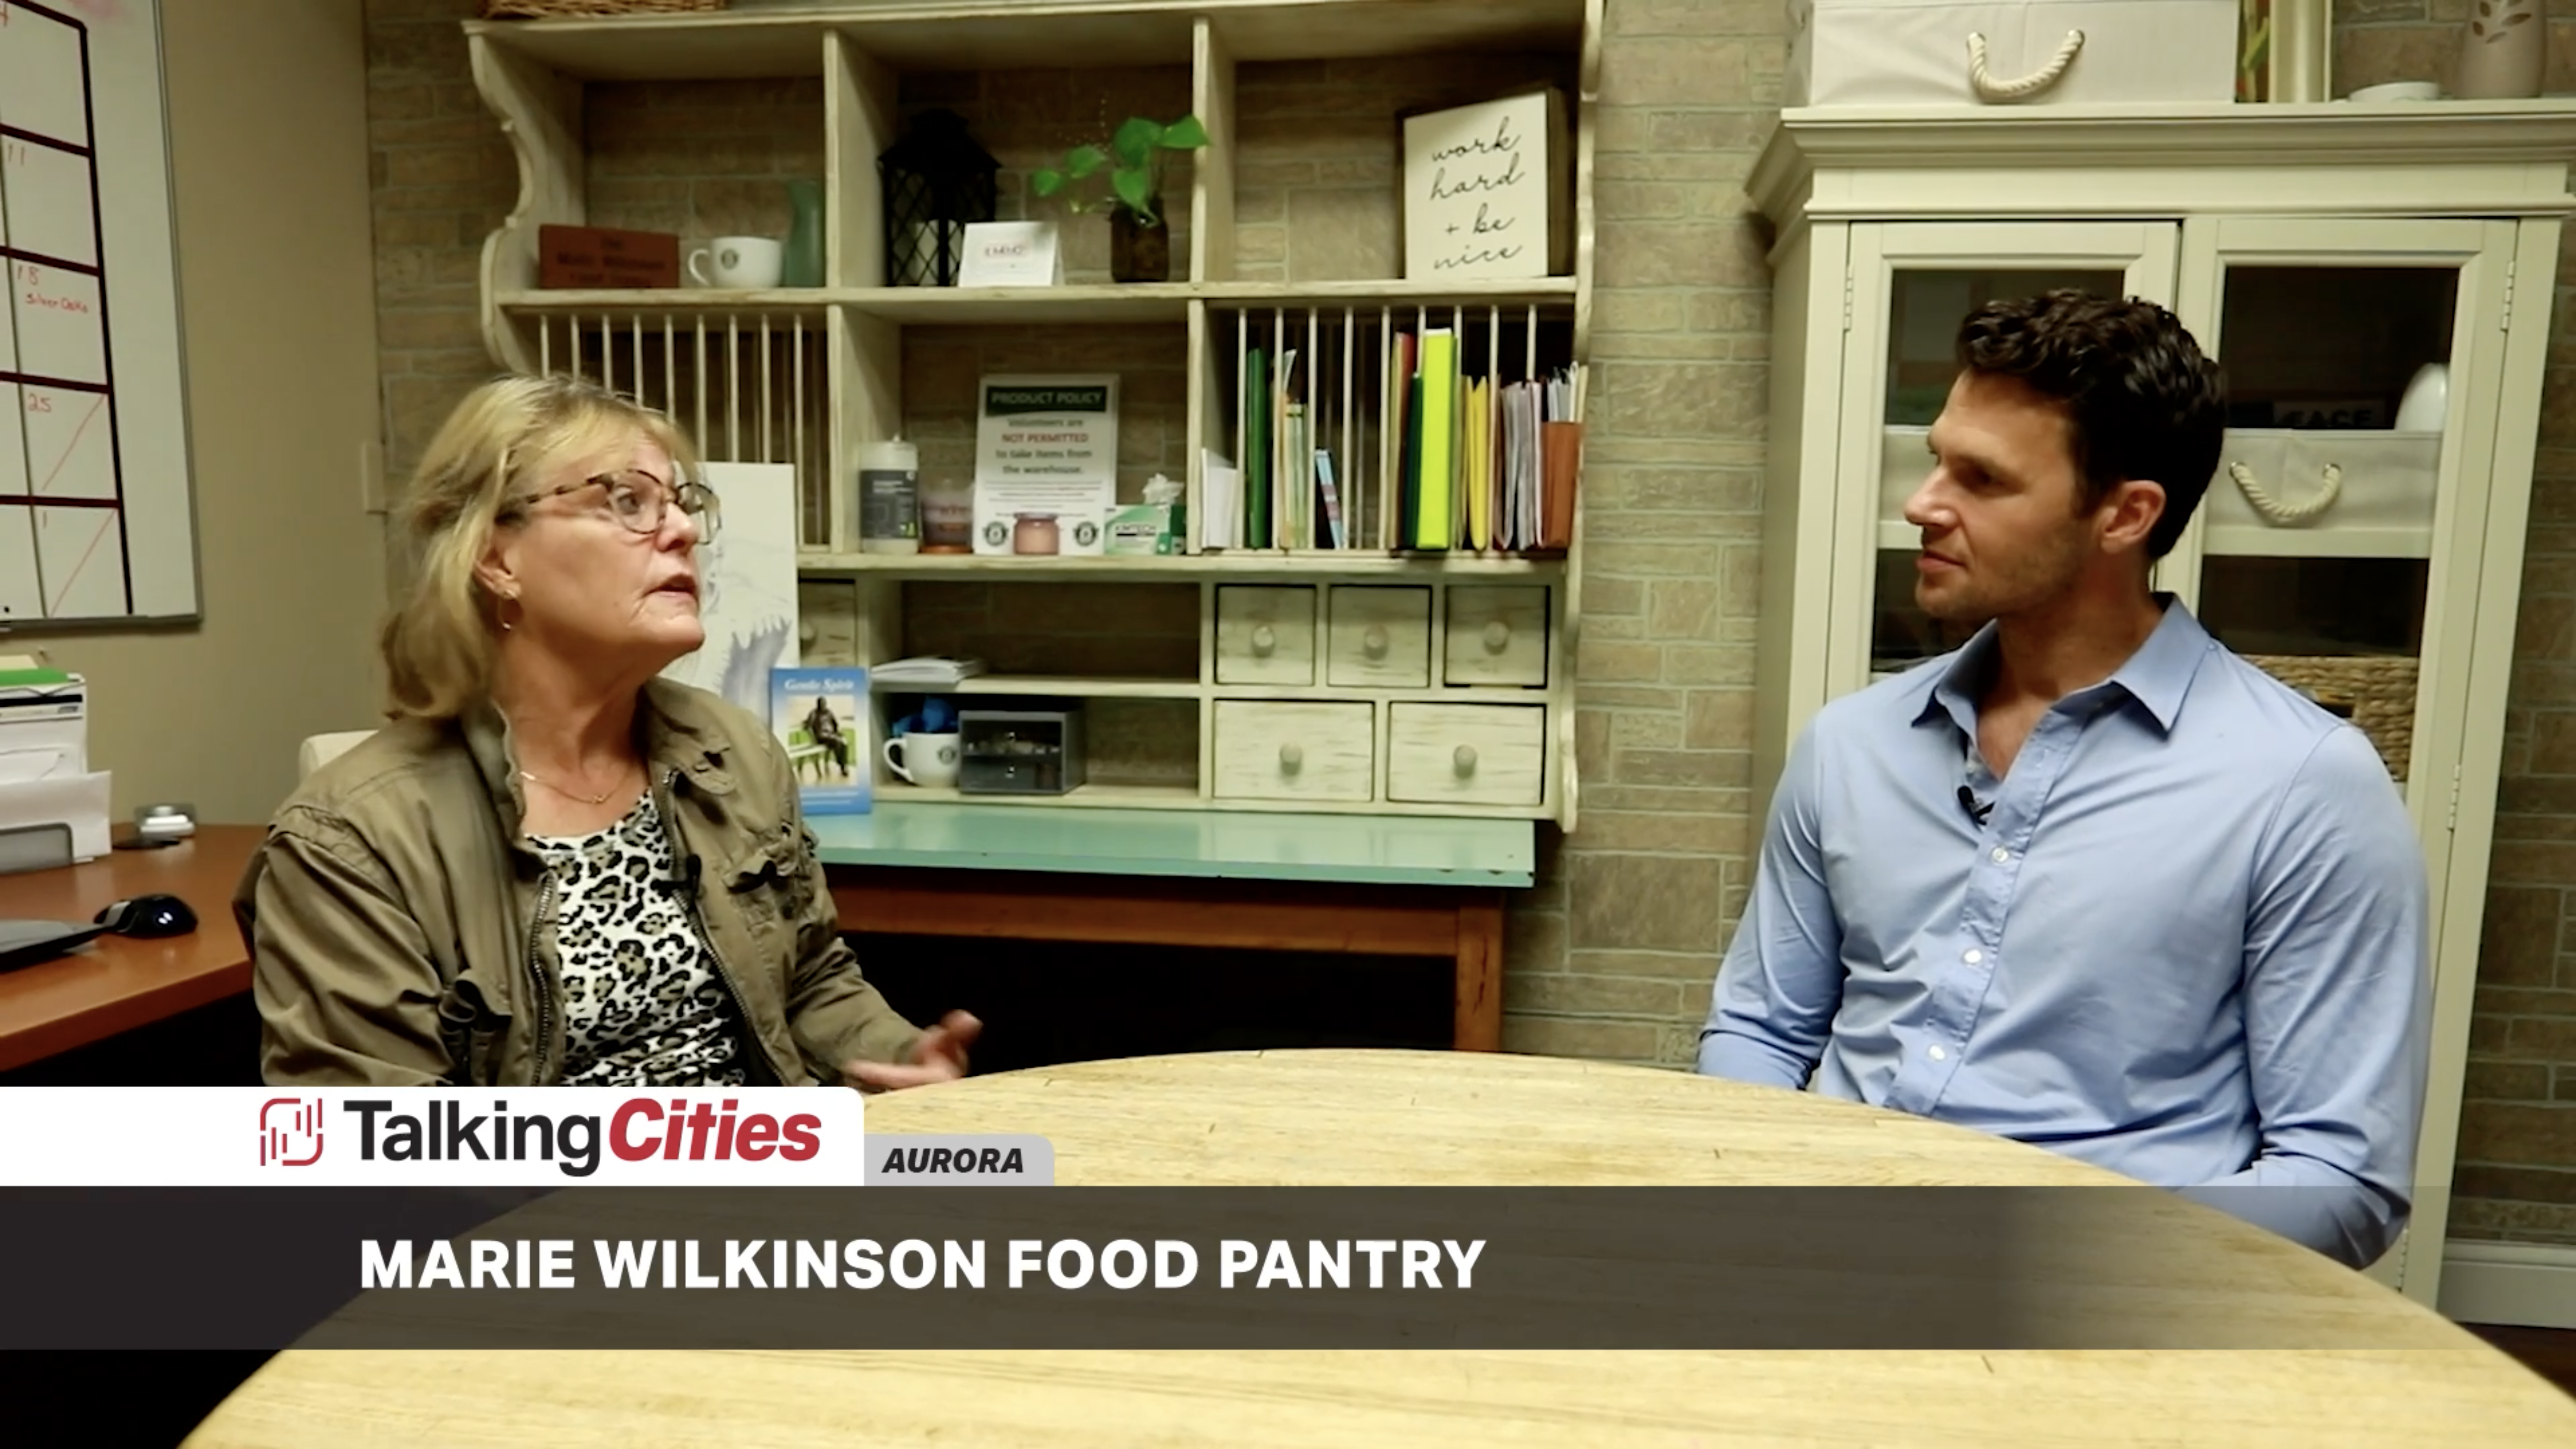 It’s a Busy Time of Year for Marie Wilkinson Food Pantry. Find Out How You Can Help Keep Their Shelves Stocked